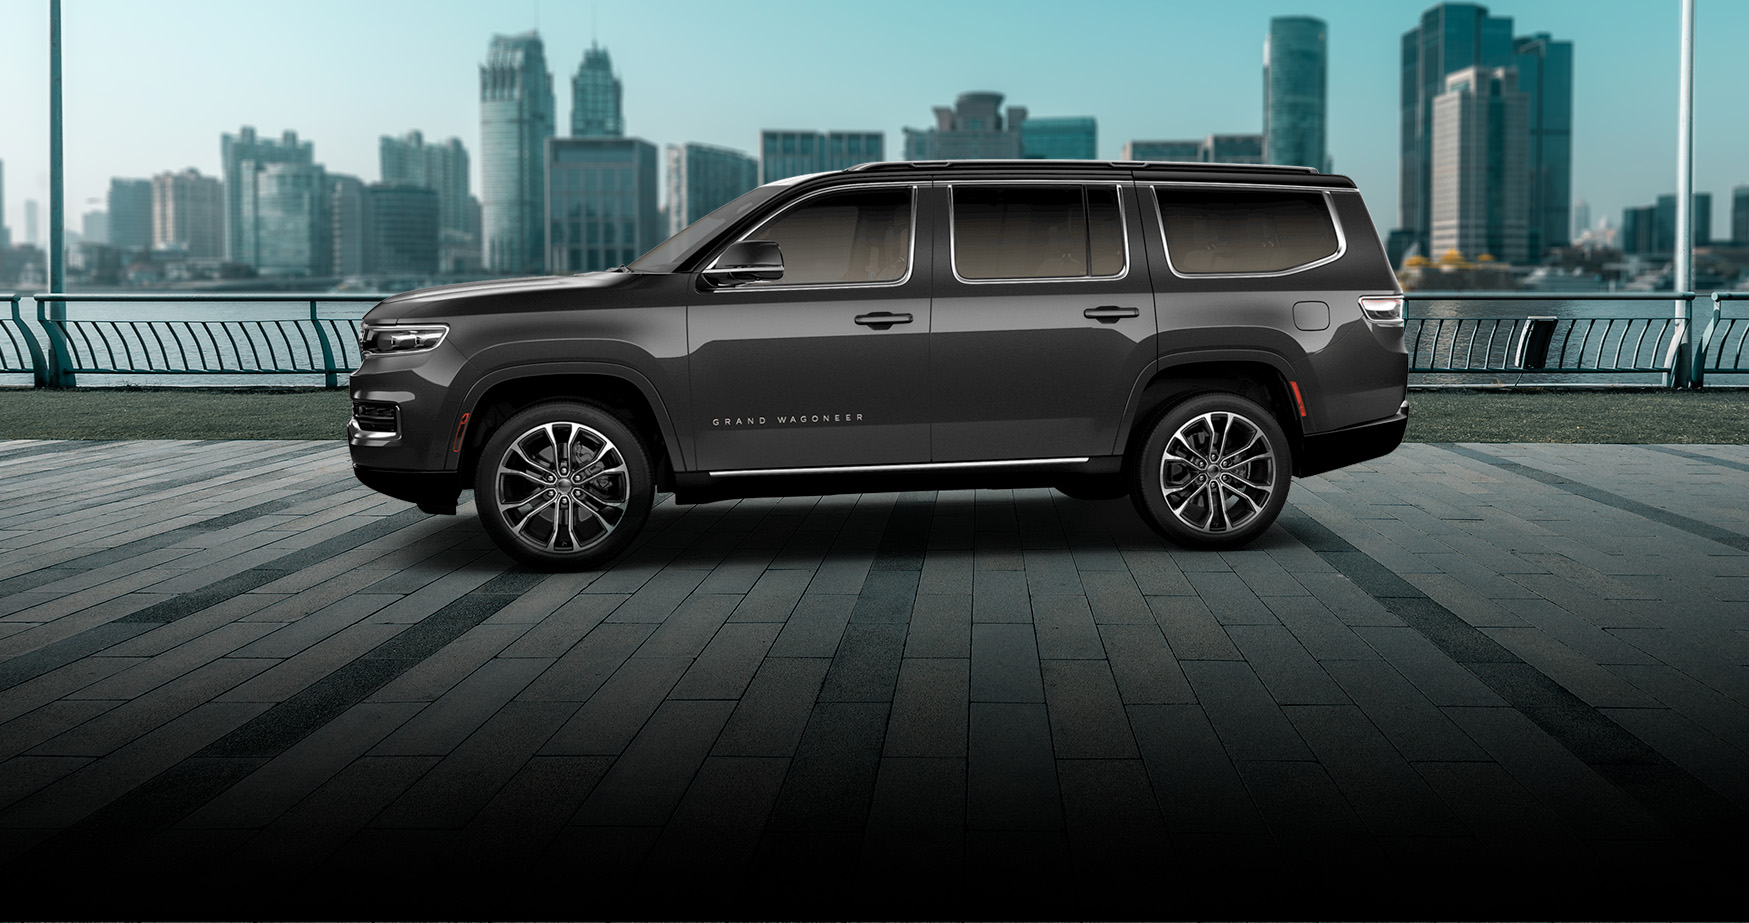 The 2023 Jeep Grand Wagoneer Price starts at $87,995. The Jeep Grand Wagoneer is the Jeep SUV 2023 changing the game at your number one car dealer in Columbia, Tennessee.